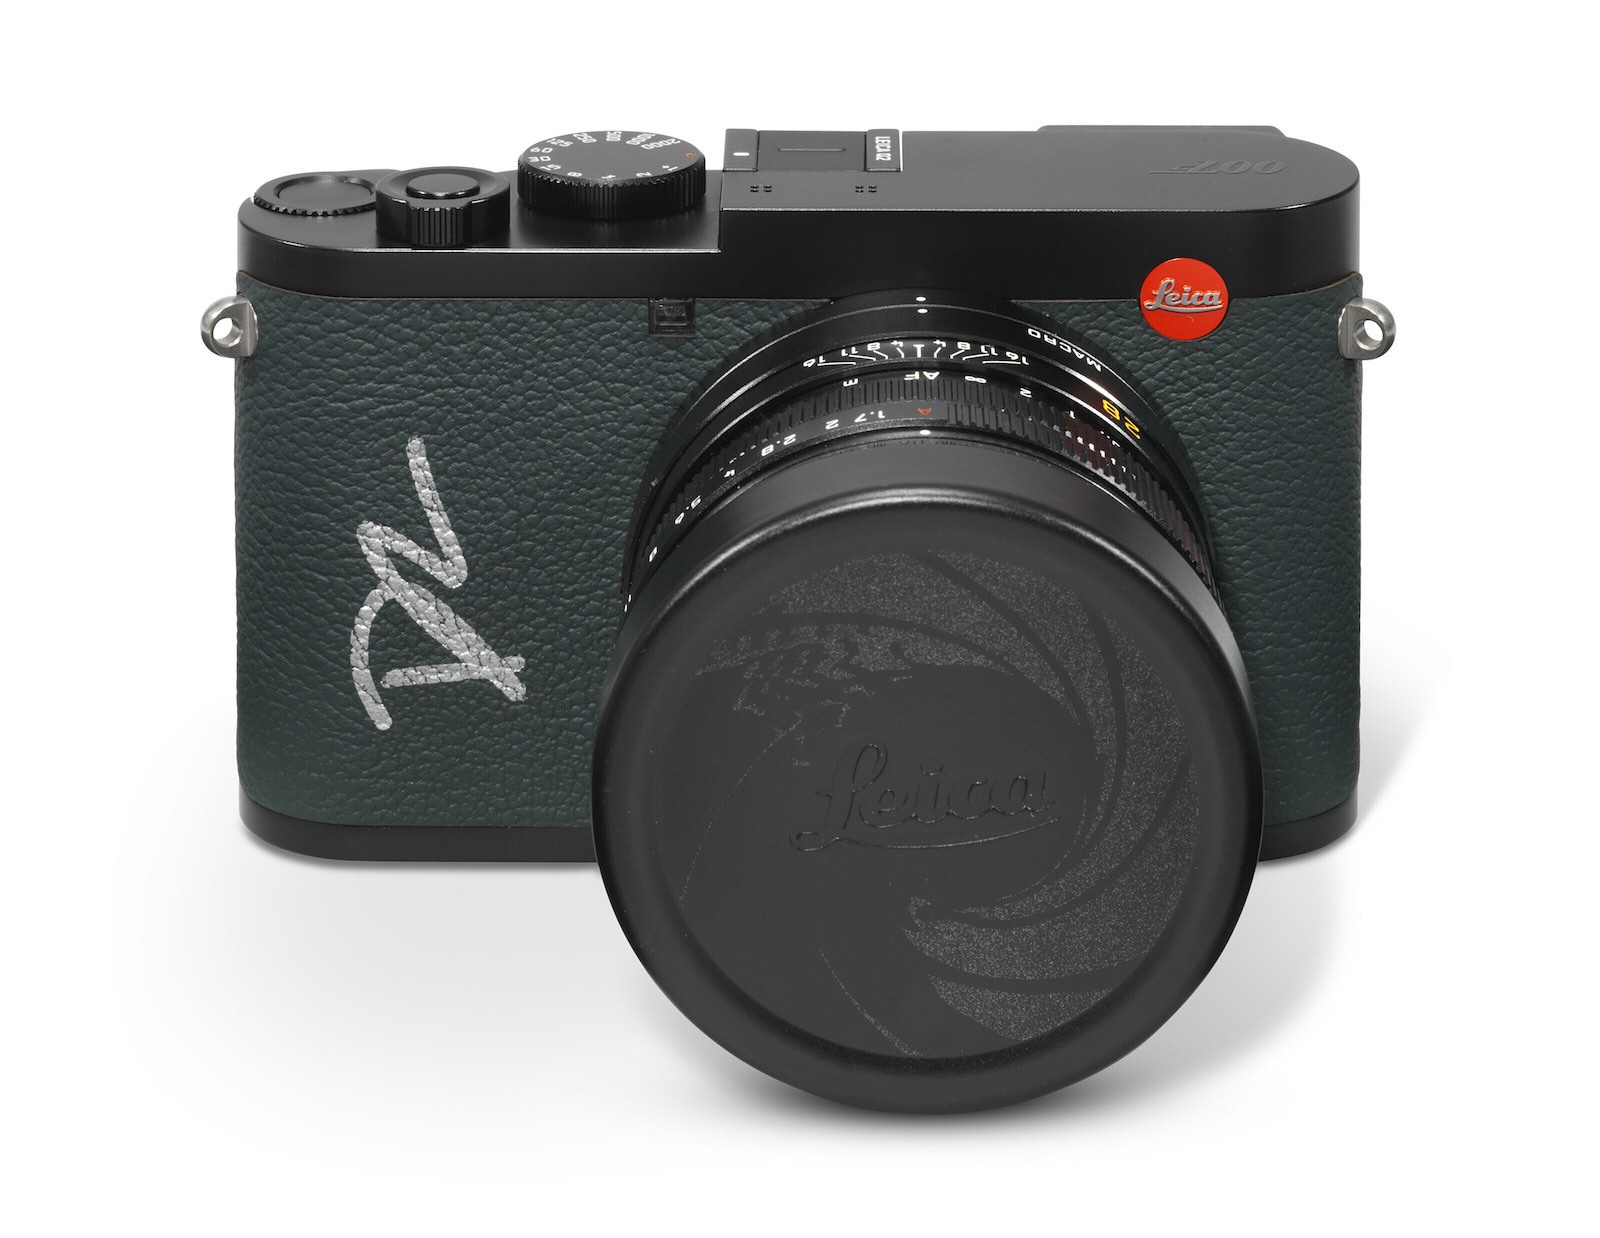 Leica Q2 James Bond limited edition camera with 007 serial number 